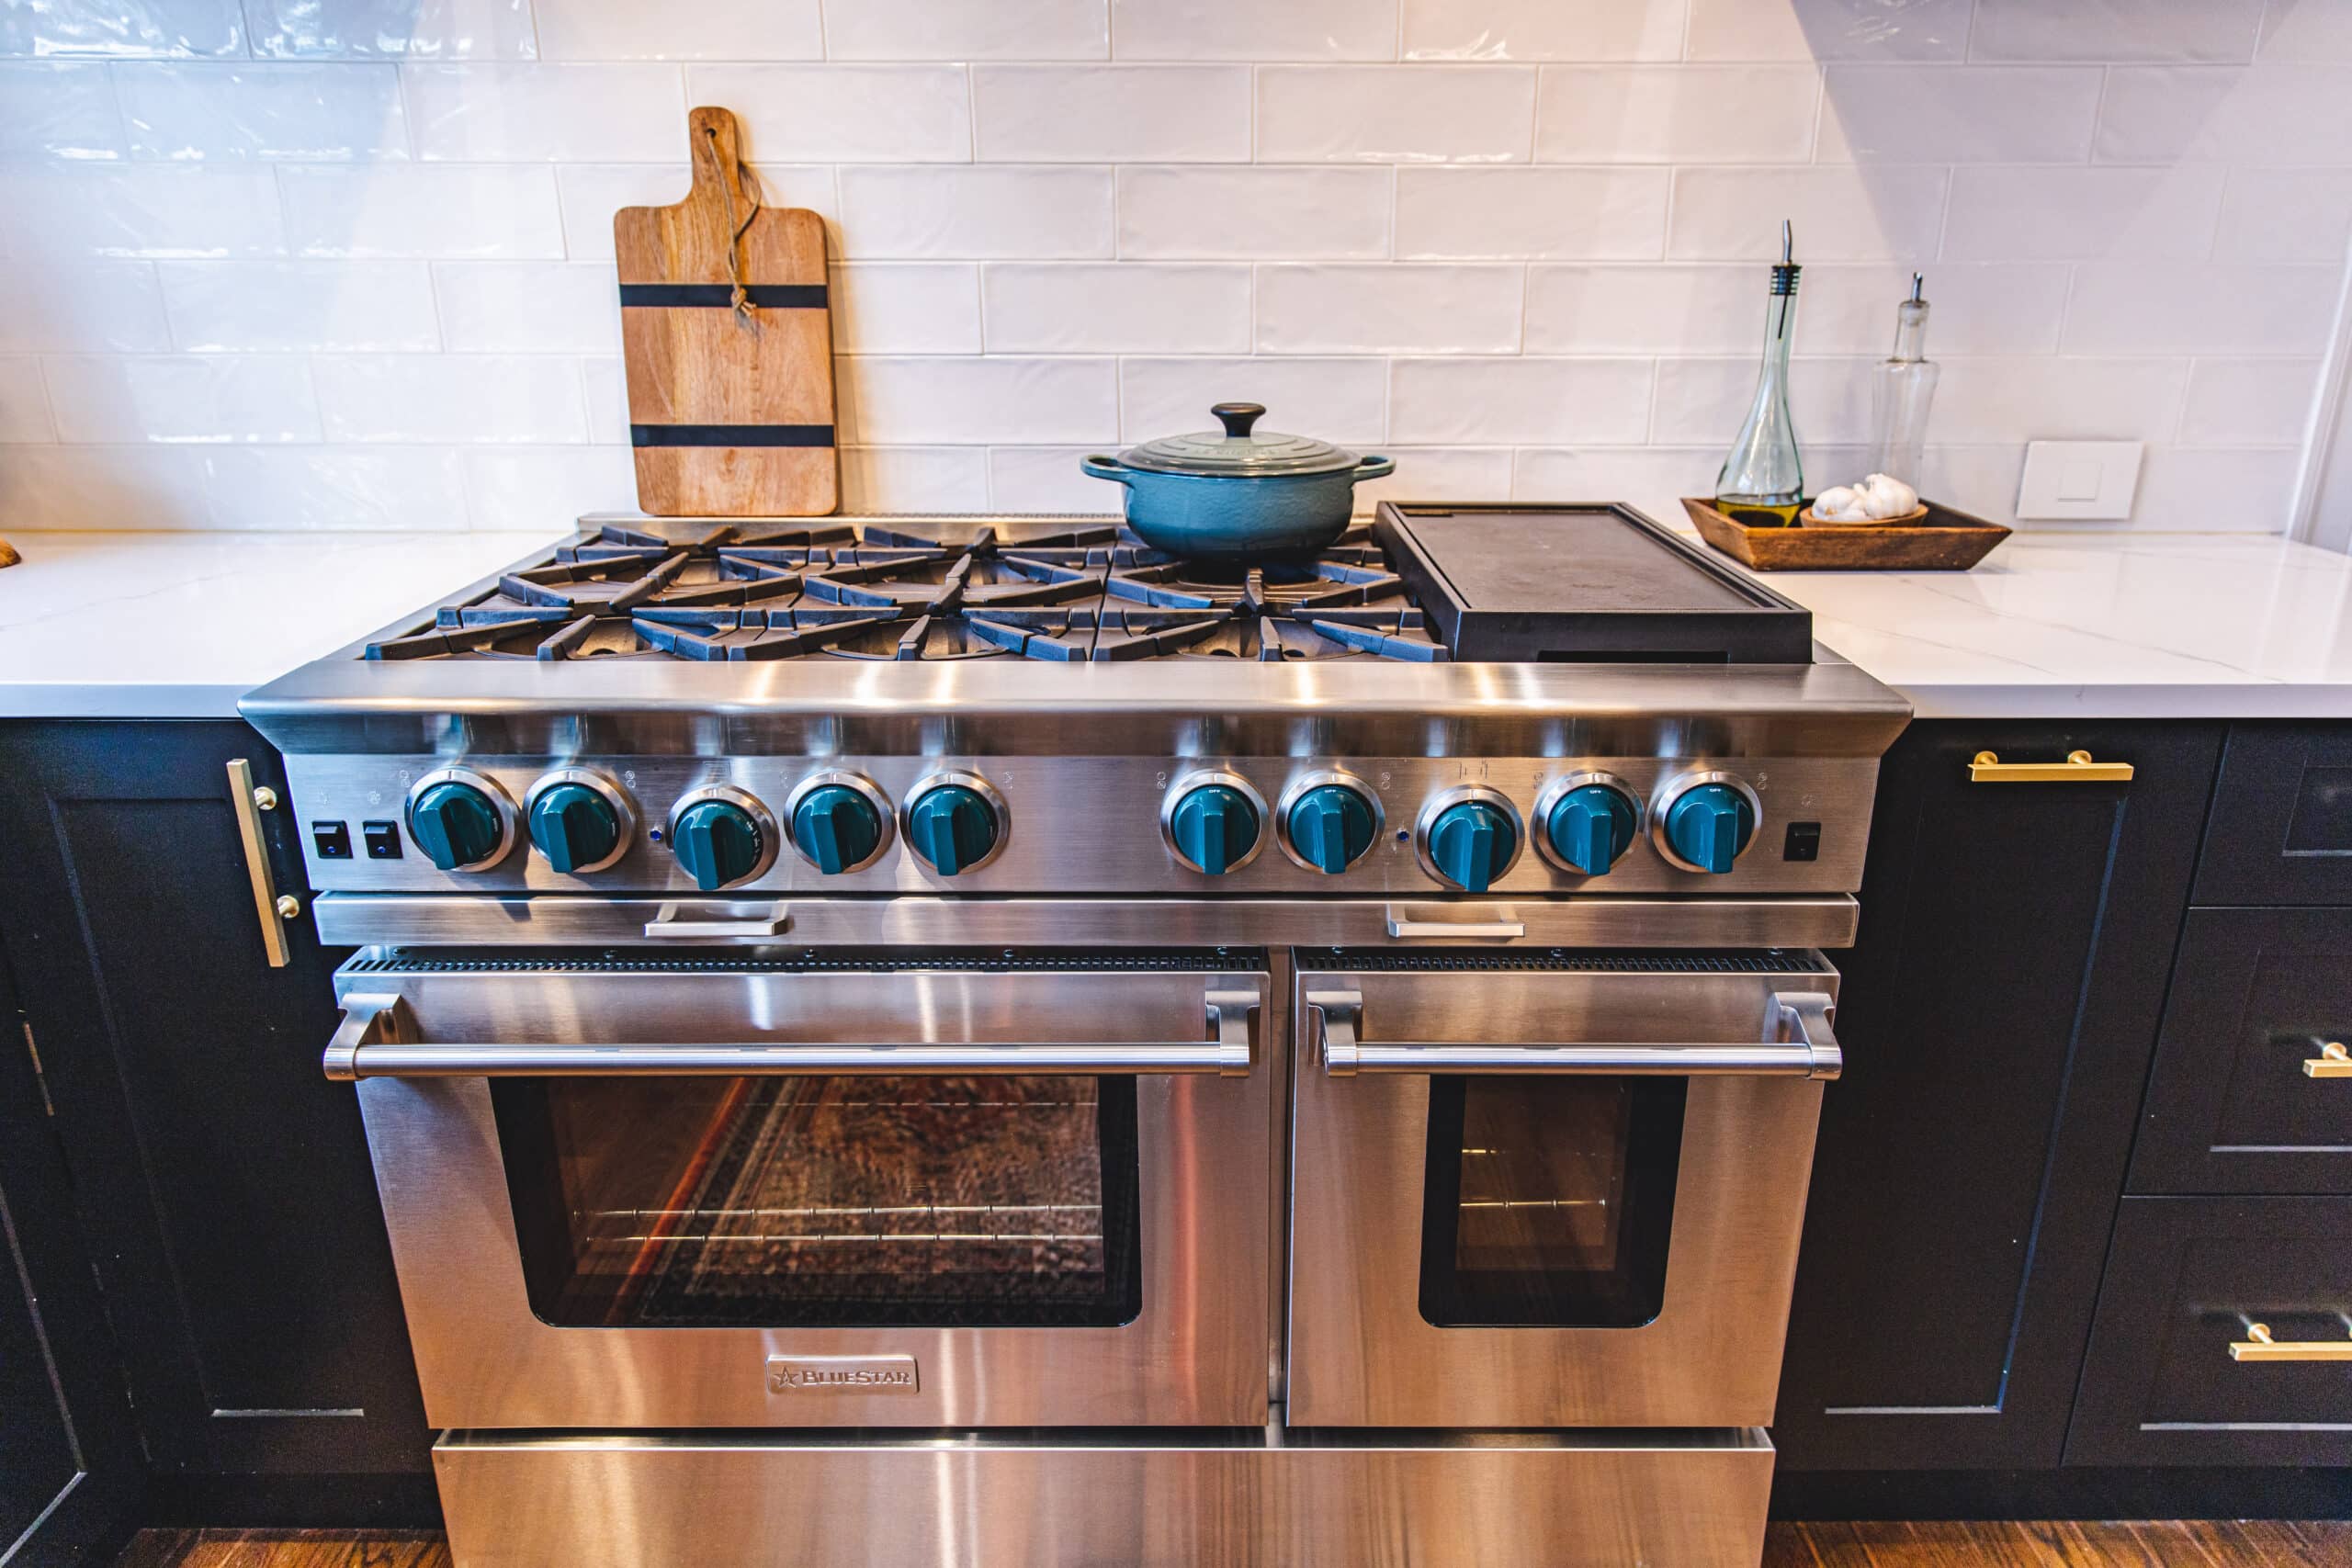 A modern stainless steel stove top oven in a well-lit kitchen